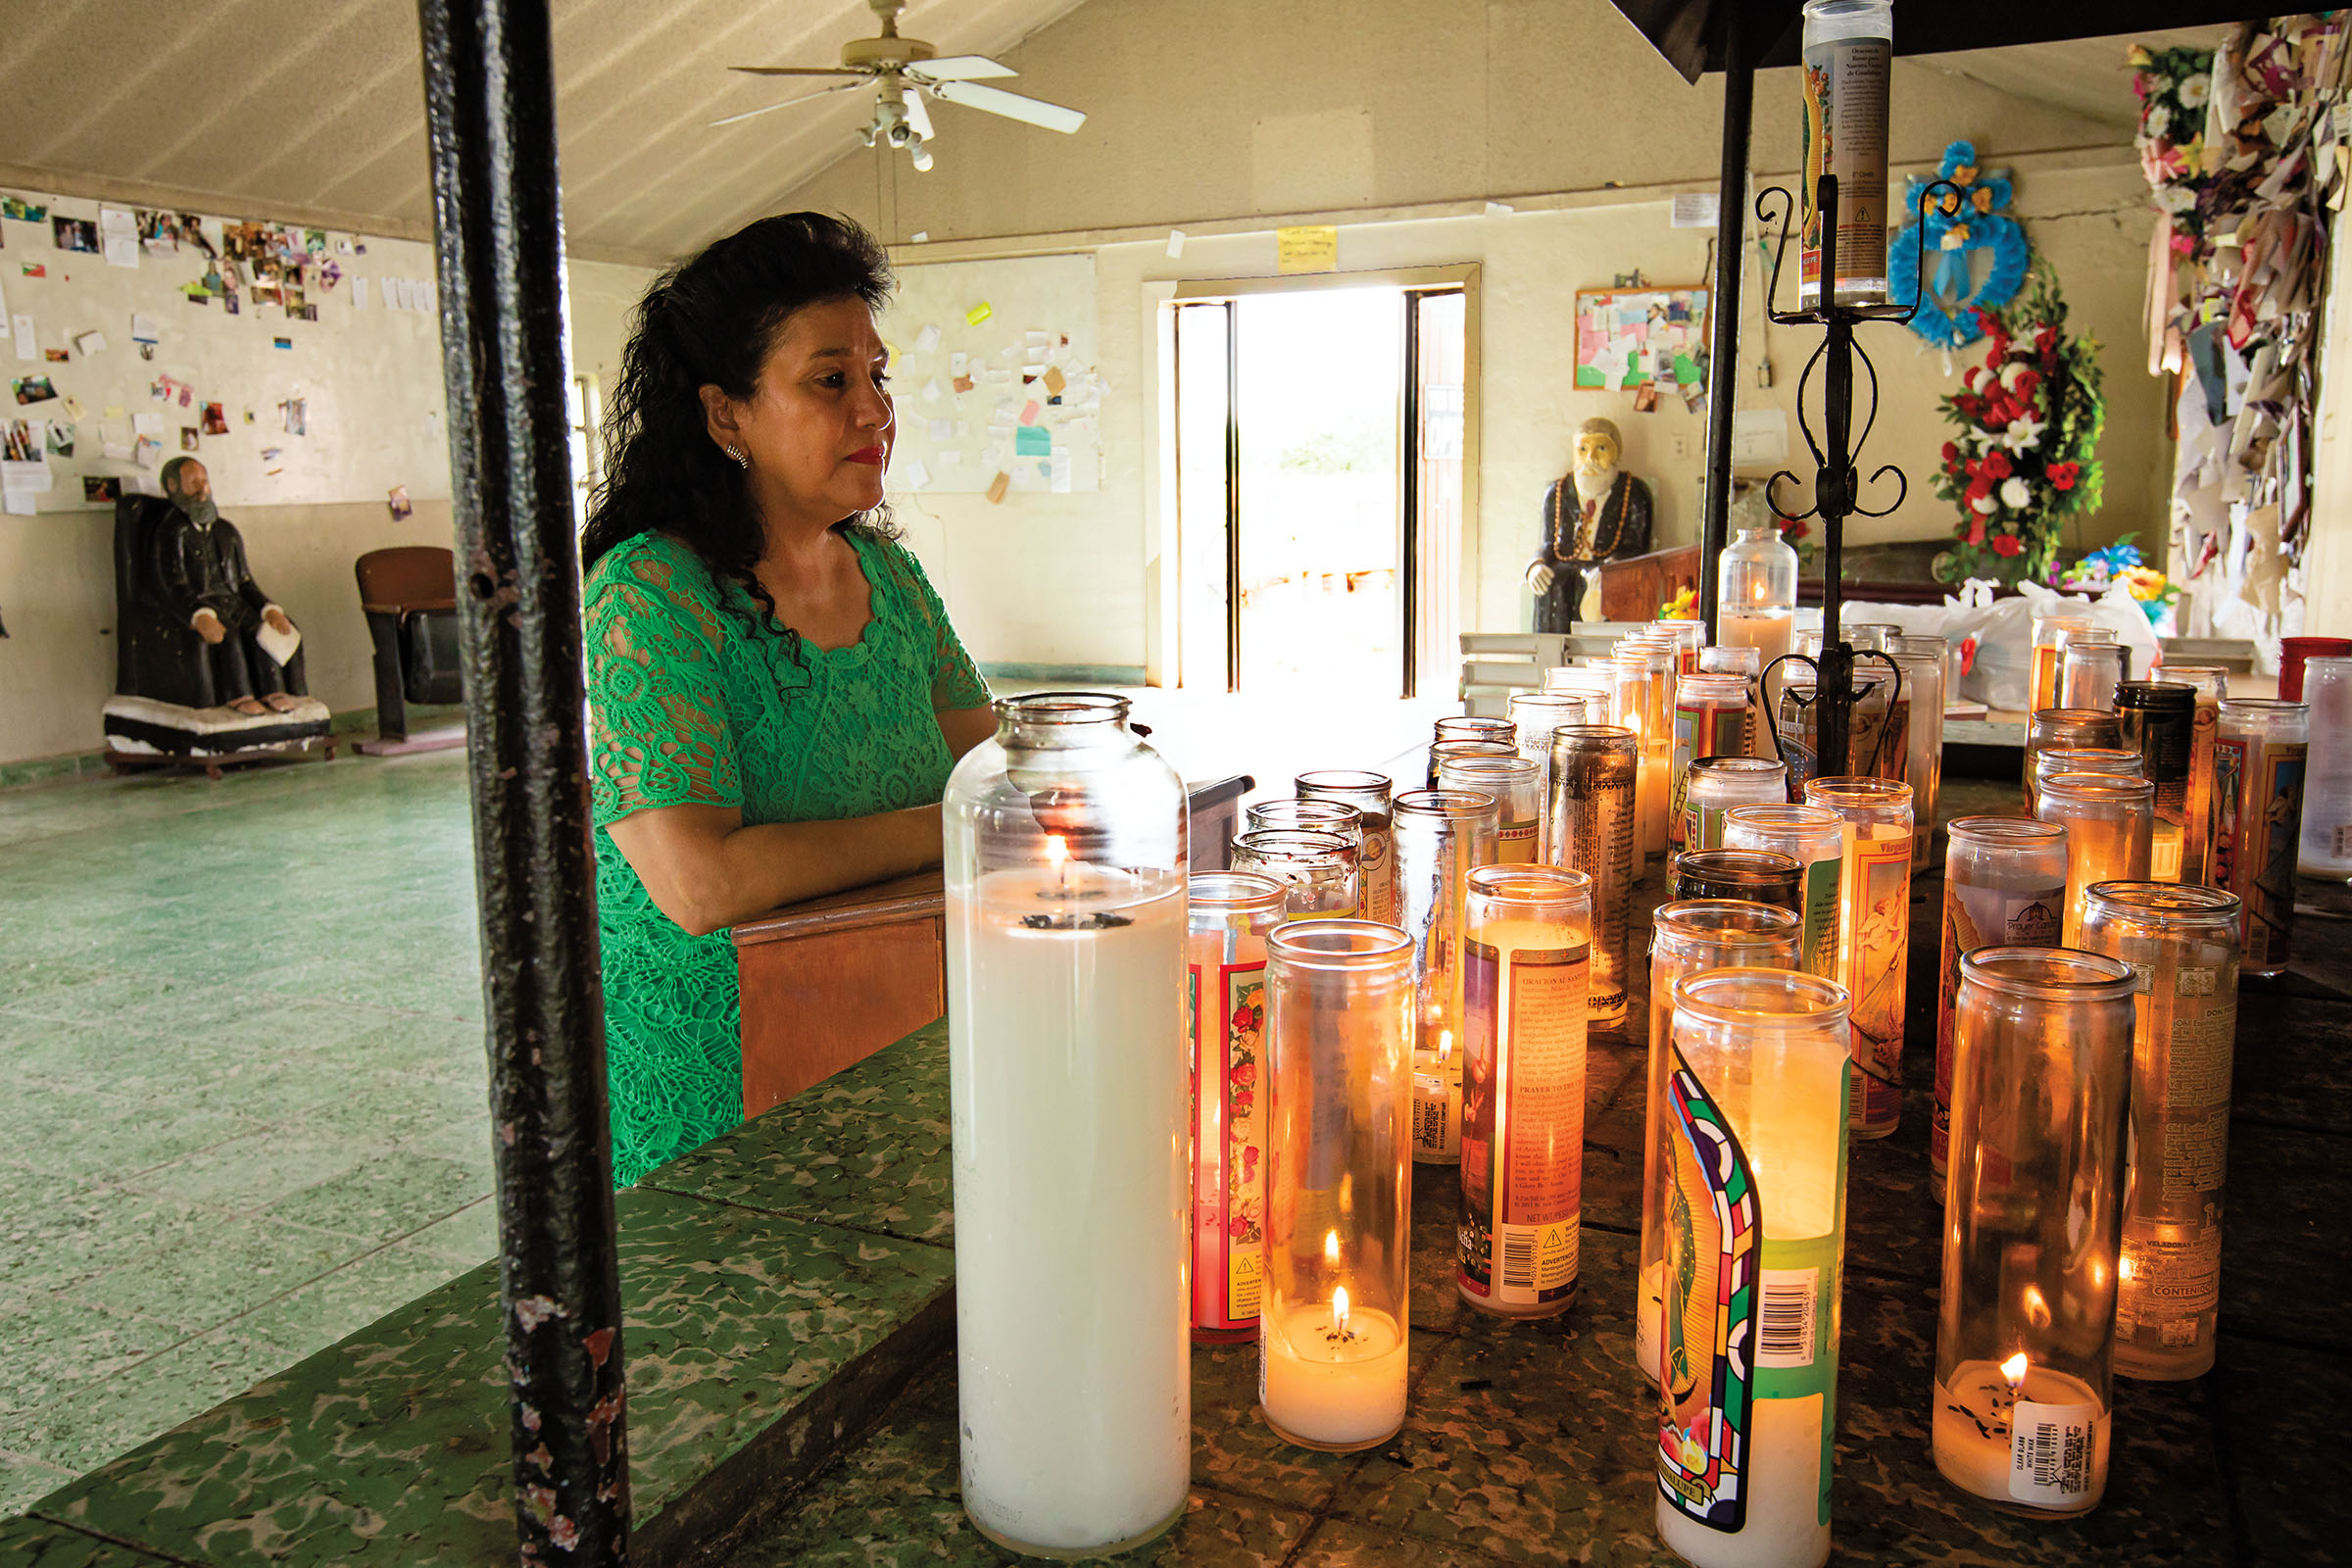 A woman in green stands before an altar of lit candles